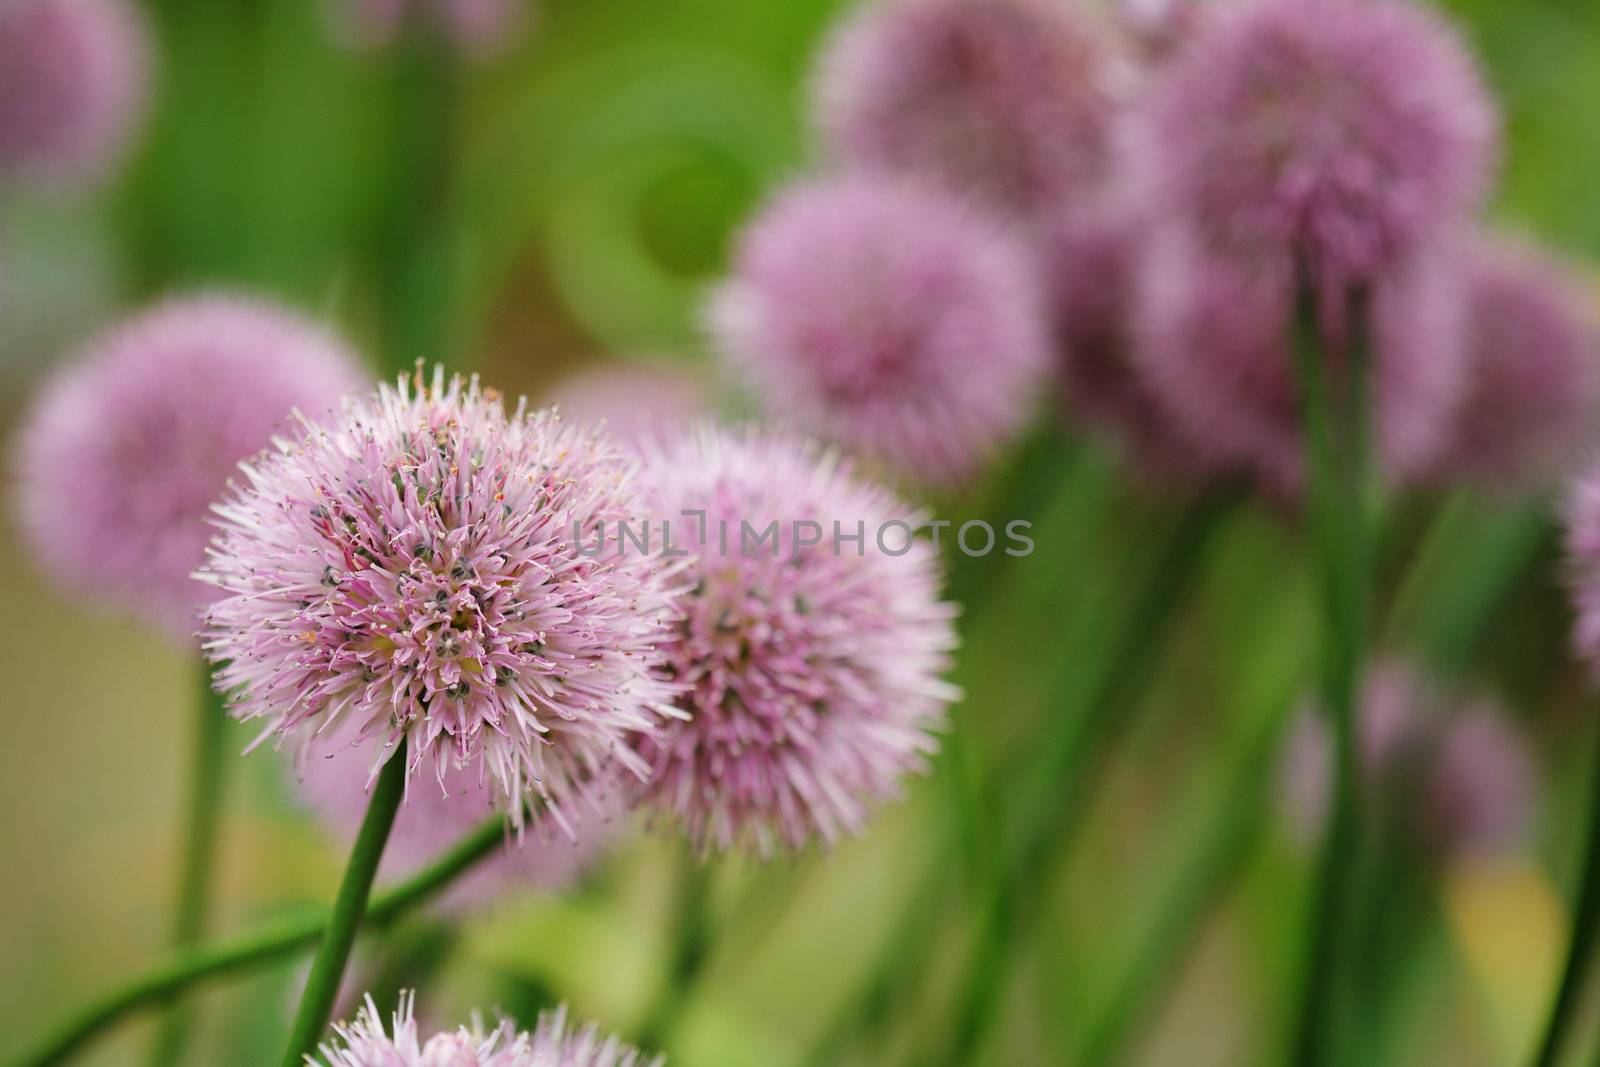 Chives onion plant blossoming. Short depth of field.